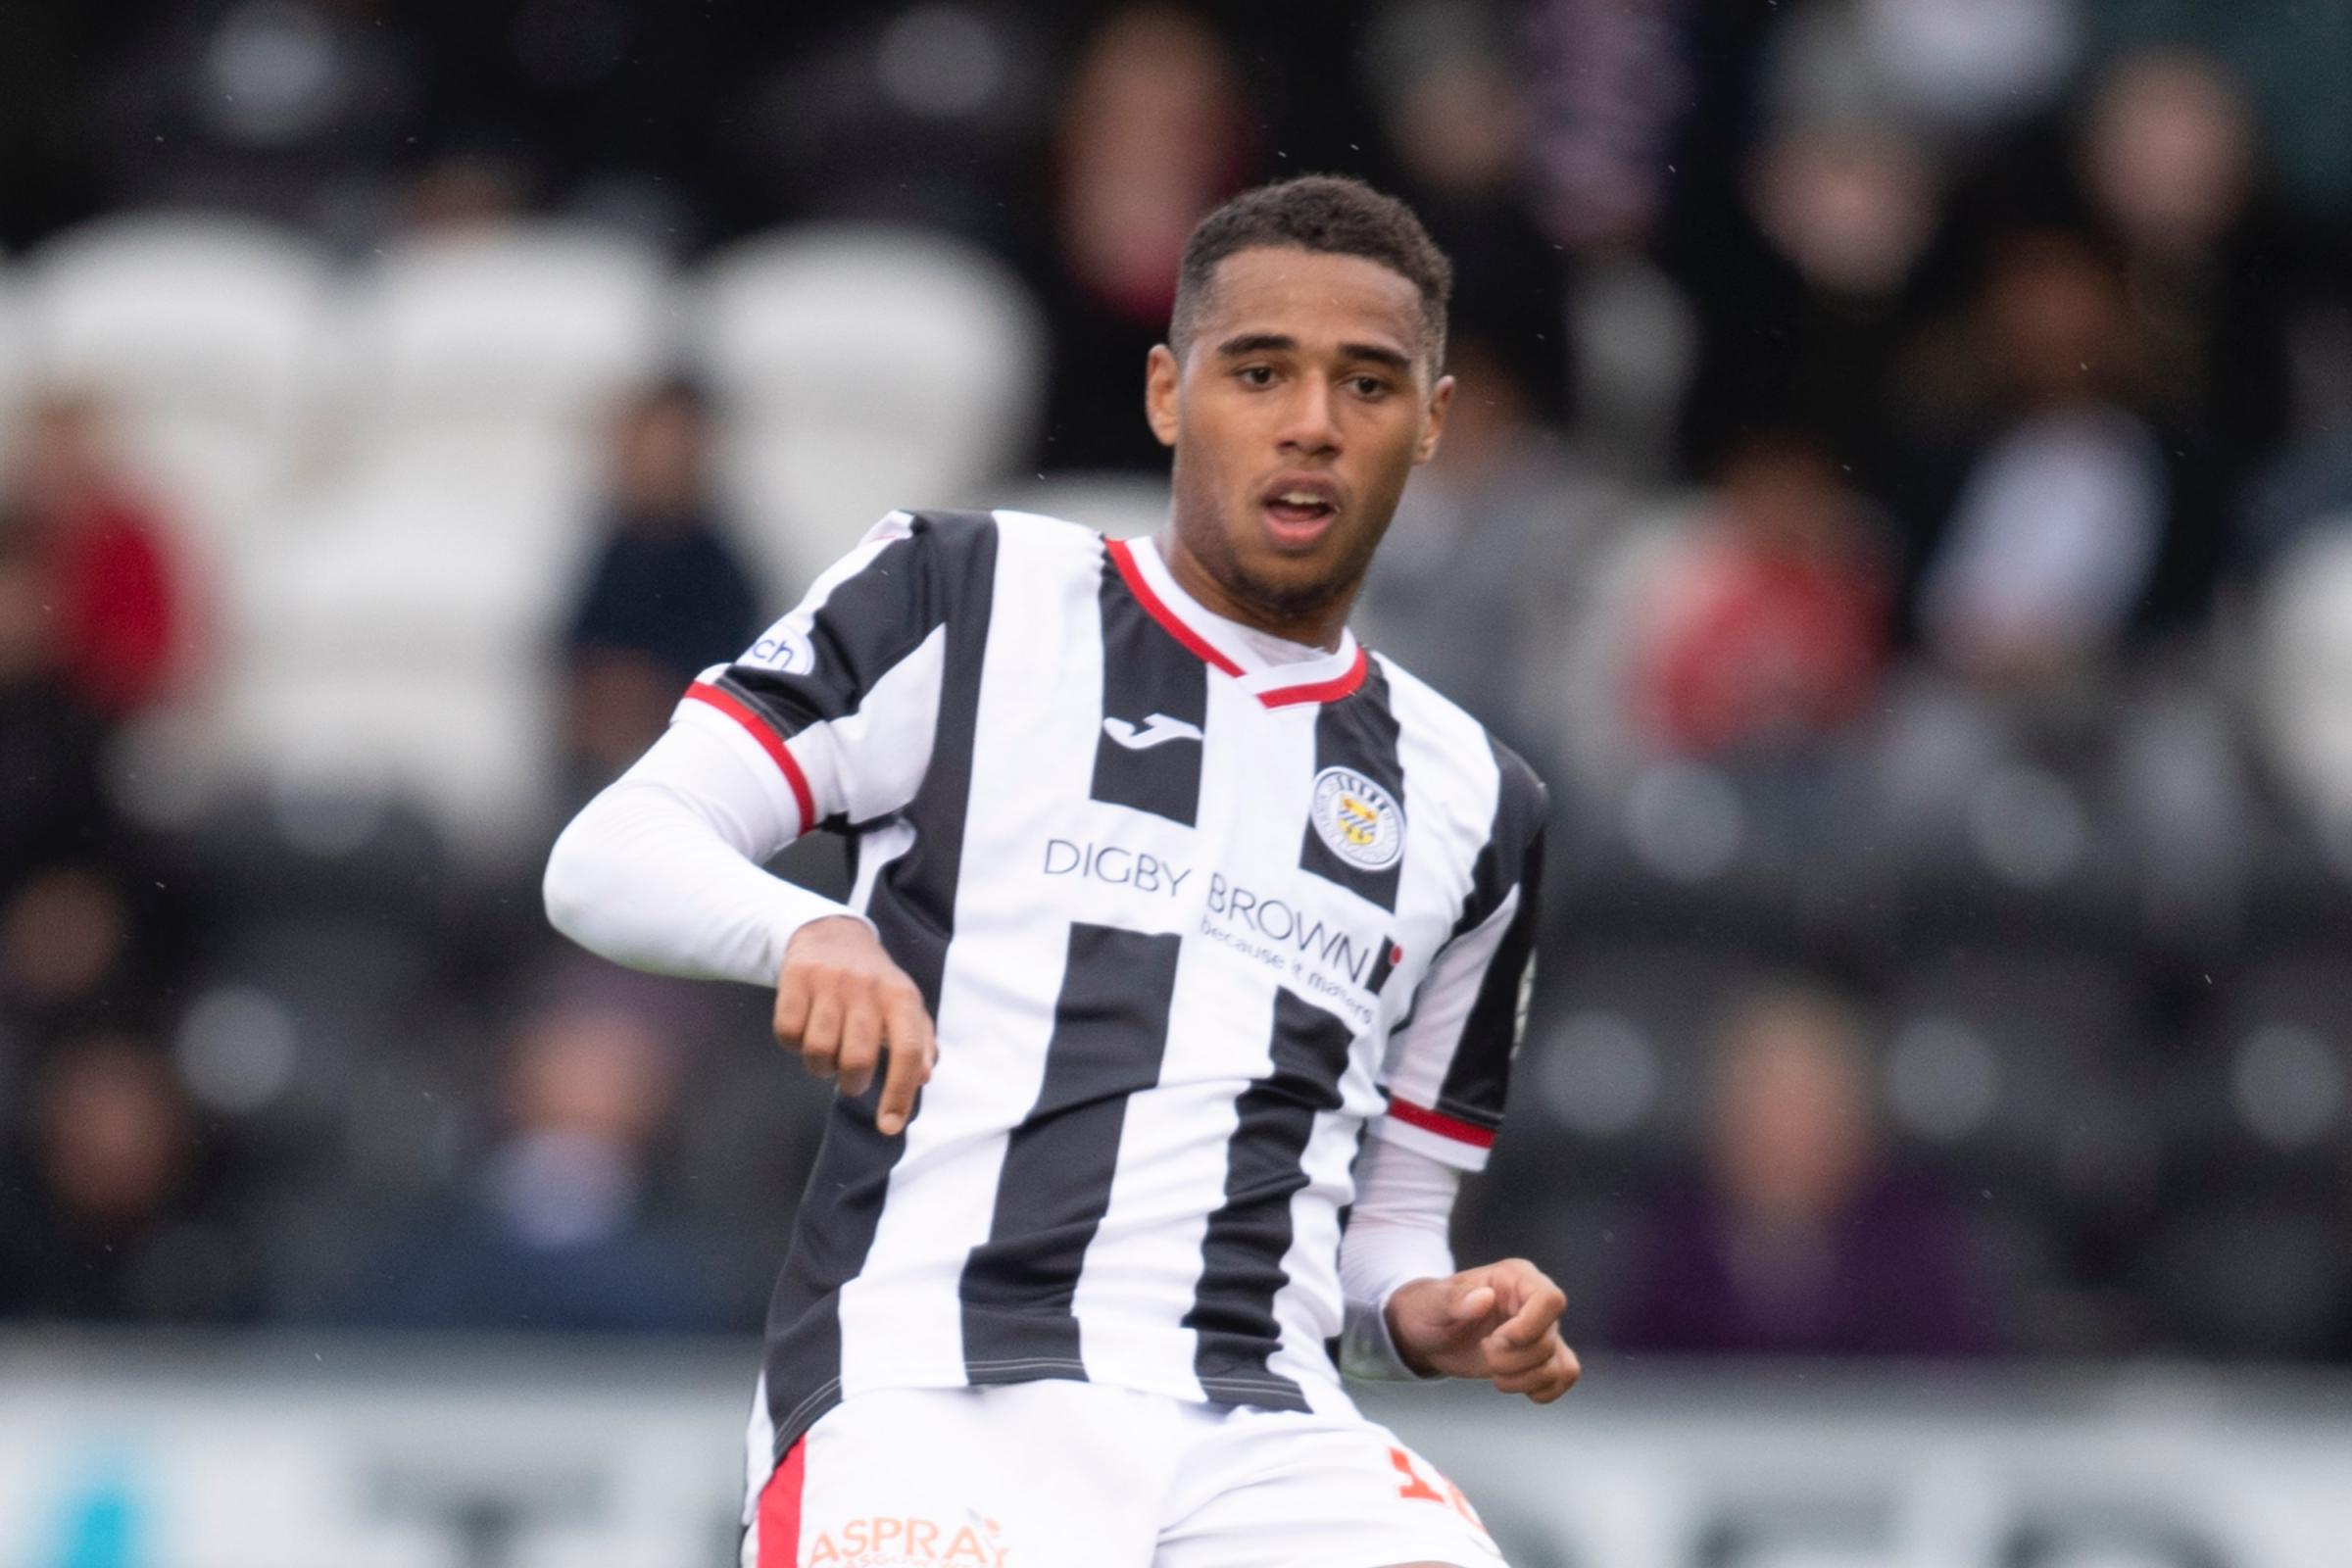 St Mirren confirm sale of Erhahon to Lincoln City